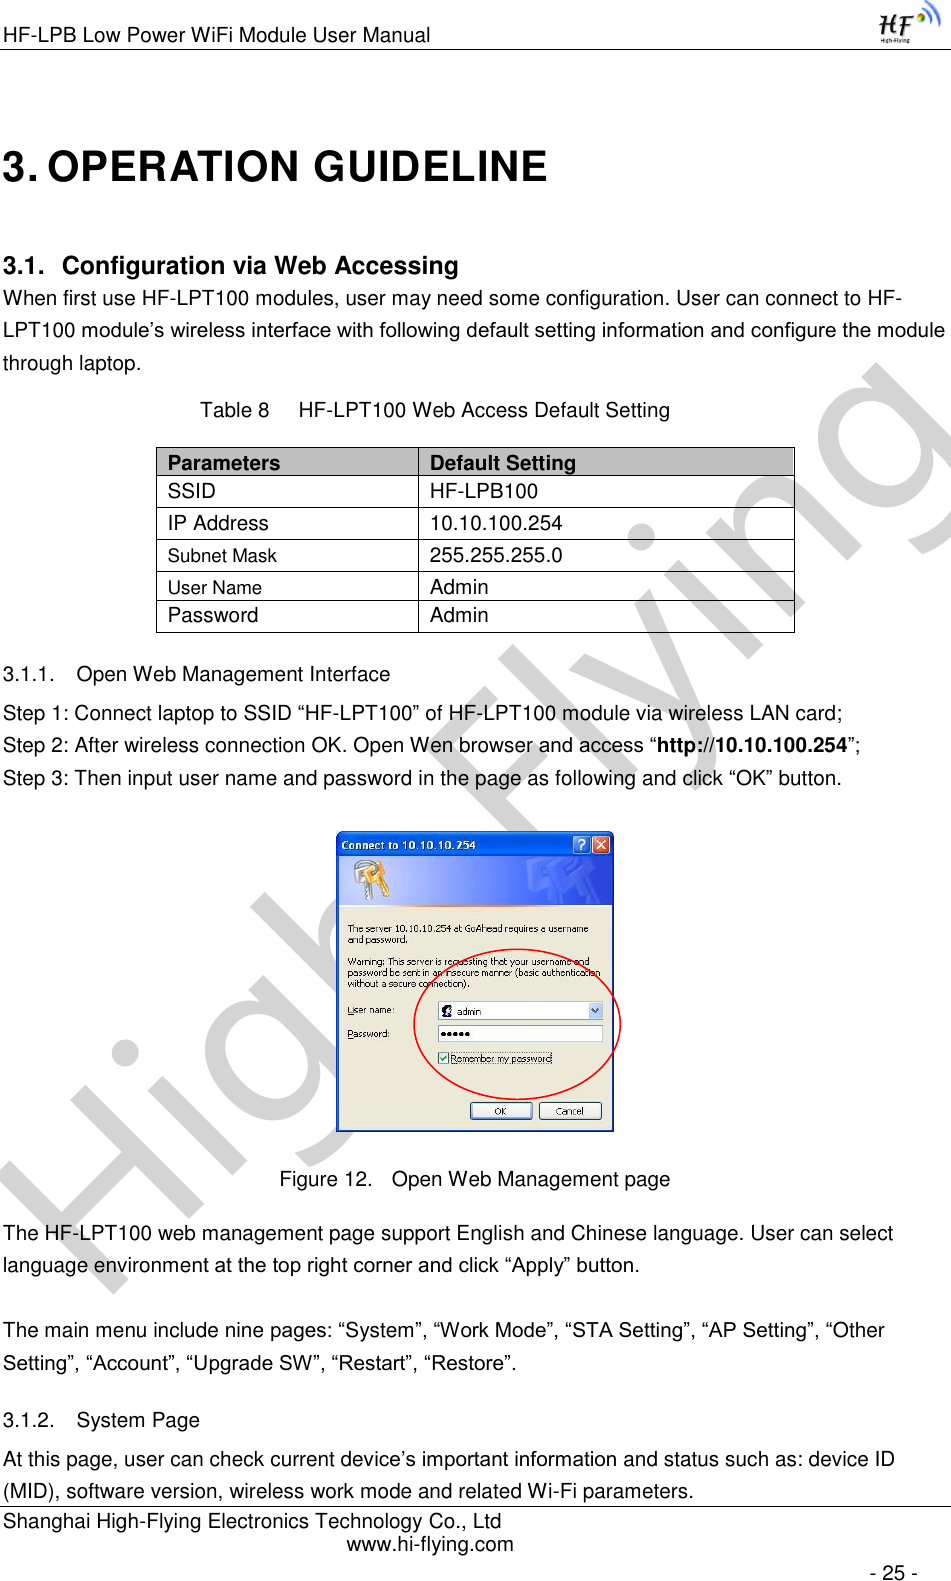 High-FlyingHF-LPB Low Power WiFi Module User Manual Shanghai High-Flying Electronics Technology Co., Ltd www.hi-flying.com   - 25 - 3. OPERATION GUIDELINE 3.1. Configuration via Web Accessing When first use HF-LPT100 modules, user may need some configuration. User can connect to HF-LPT100 module’s wireless interface with following default setting information and configure the module through laptop.           Table 8     HF-LPT100 Web Access Default Setting Parameters Default Setting SSID HF-LPB100 IP Address 10.10.100.254 Subnet Mask 255.255.255.0 User Name Admin Password Admin 3.1.1. Open Web Management Interface Step 1: Connect laptop to SSID “HF-LPT100” of HF-LPT100 module via wireless LAN card; Step 2: After wireless connection OK. Open Wen browser and access “http://10.10.100.254”; Step 3: Then input user name and password in the page as following and click “OK” button.  Figure 12. Open Web Management page The HF-LPT100 web management page support English and Chinese language. User can select language environment at the top right corner and click “Apply” button.  The main menu include nine pages: “System”, “Work Mode”, “STA Setting”, “AP Setting”, “Other Setting”, “Account”, “Upgrade SW”, “Restart”, “Restore”. 3.1.2. System Page At this page, user can check current device’s important information and status such as: device ID (MID), software version, wireless work mode and related Wi-Fi parameters. 